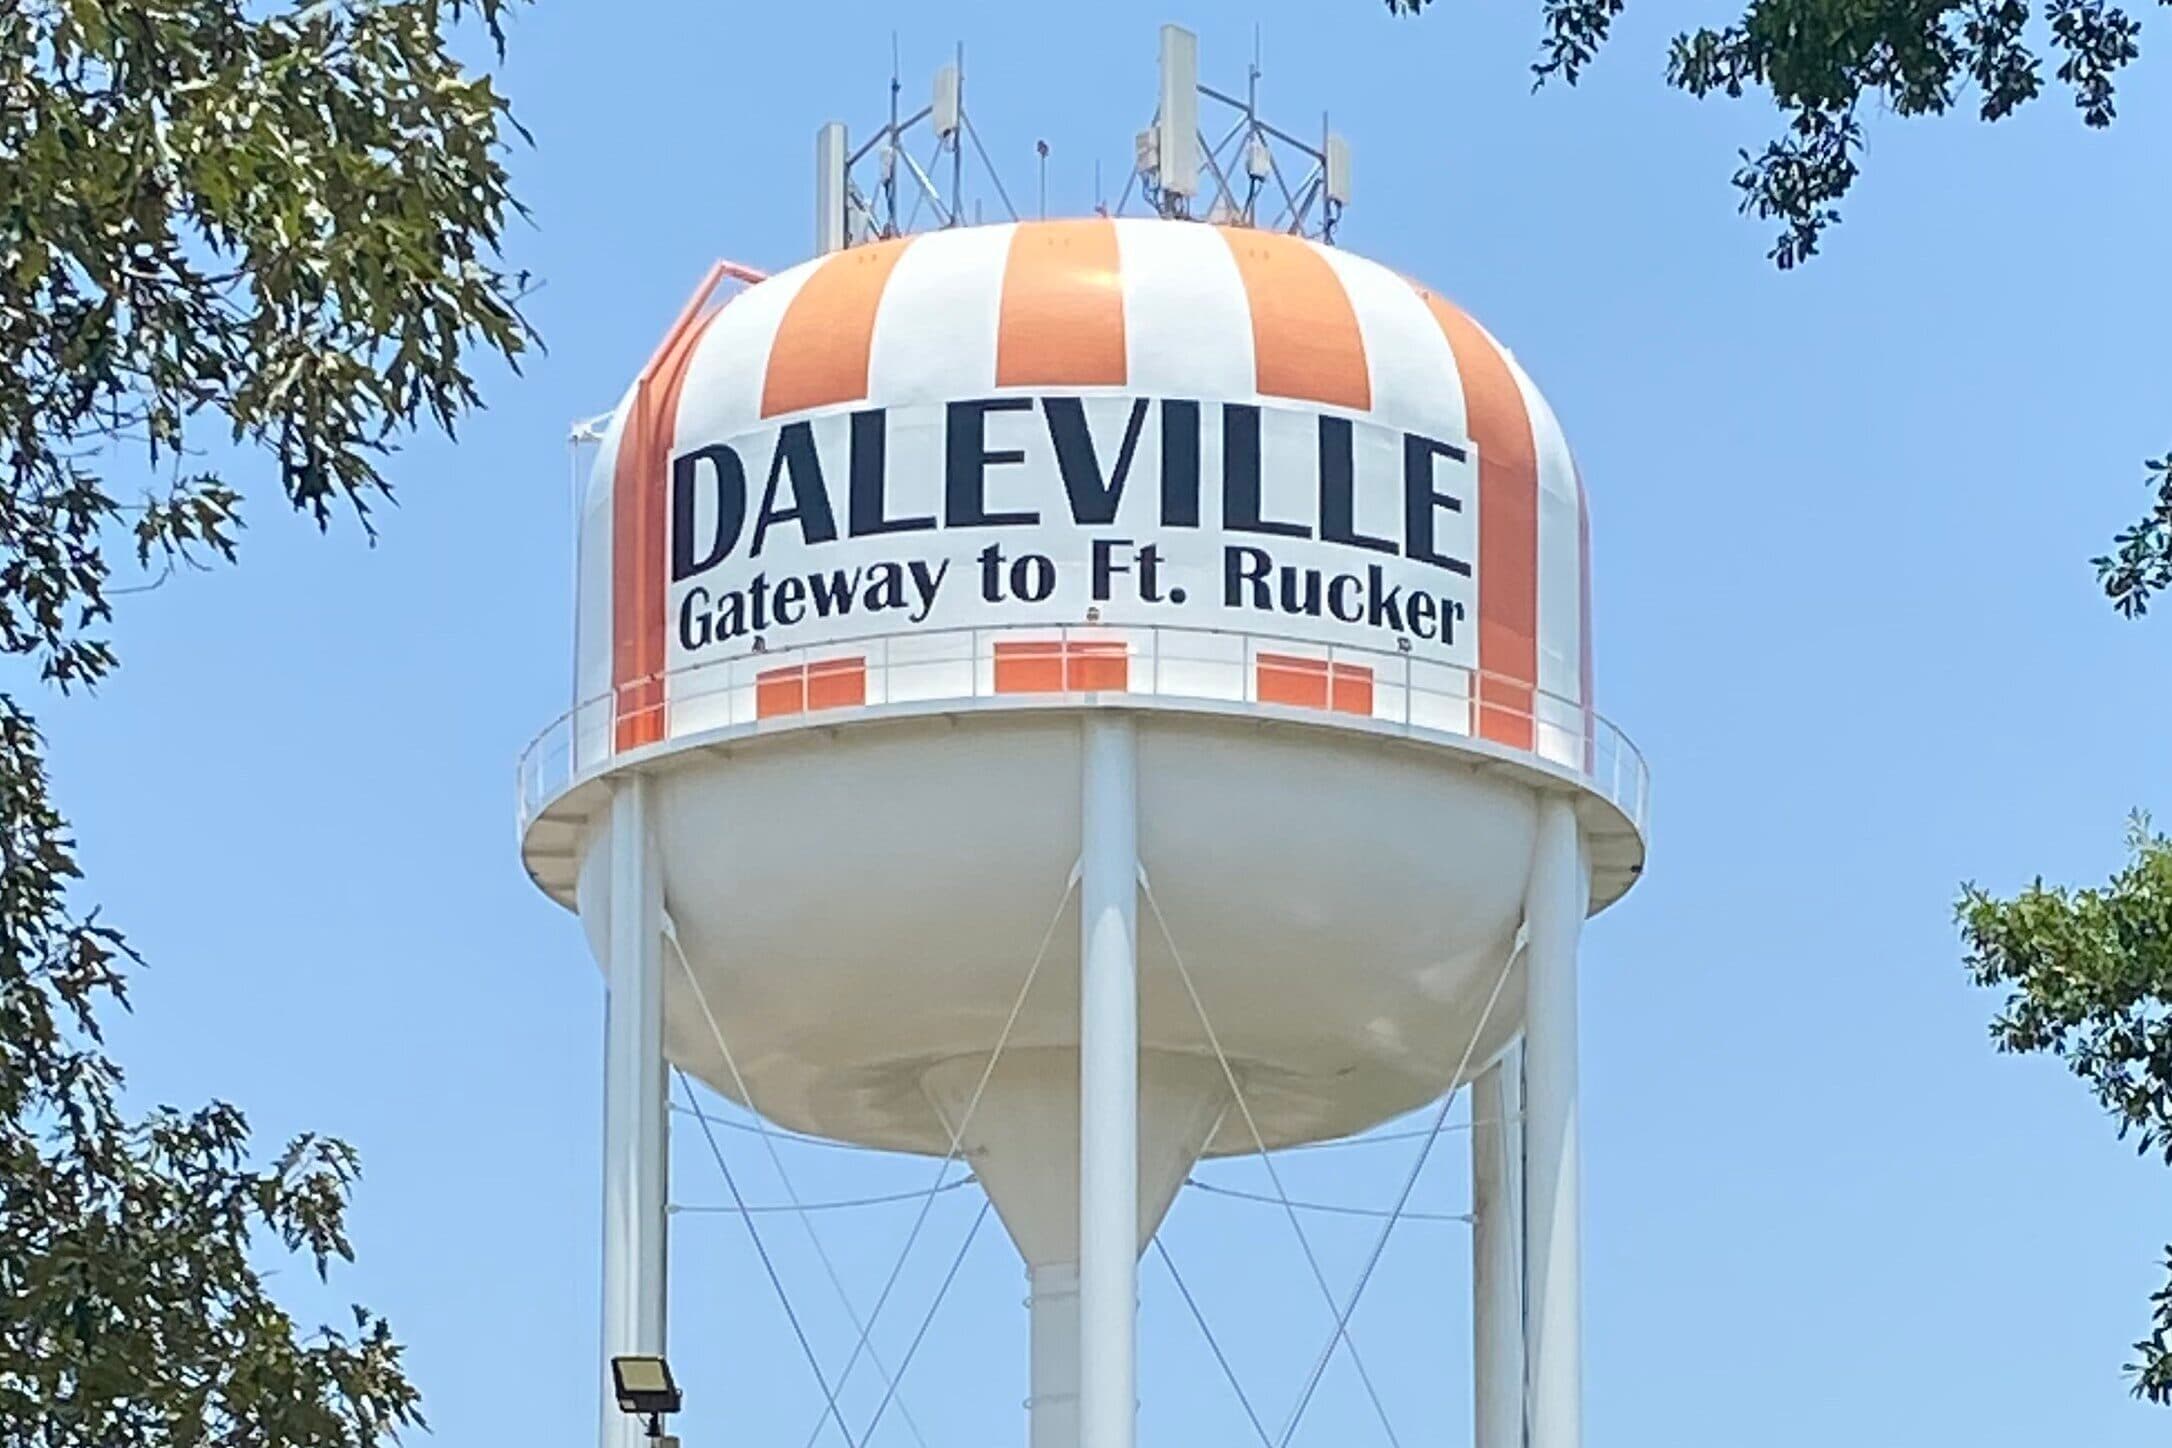 Daleville water tower